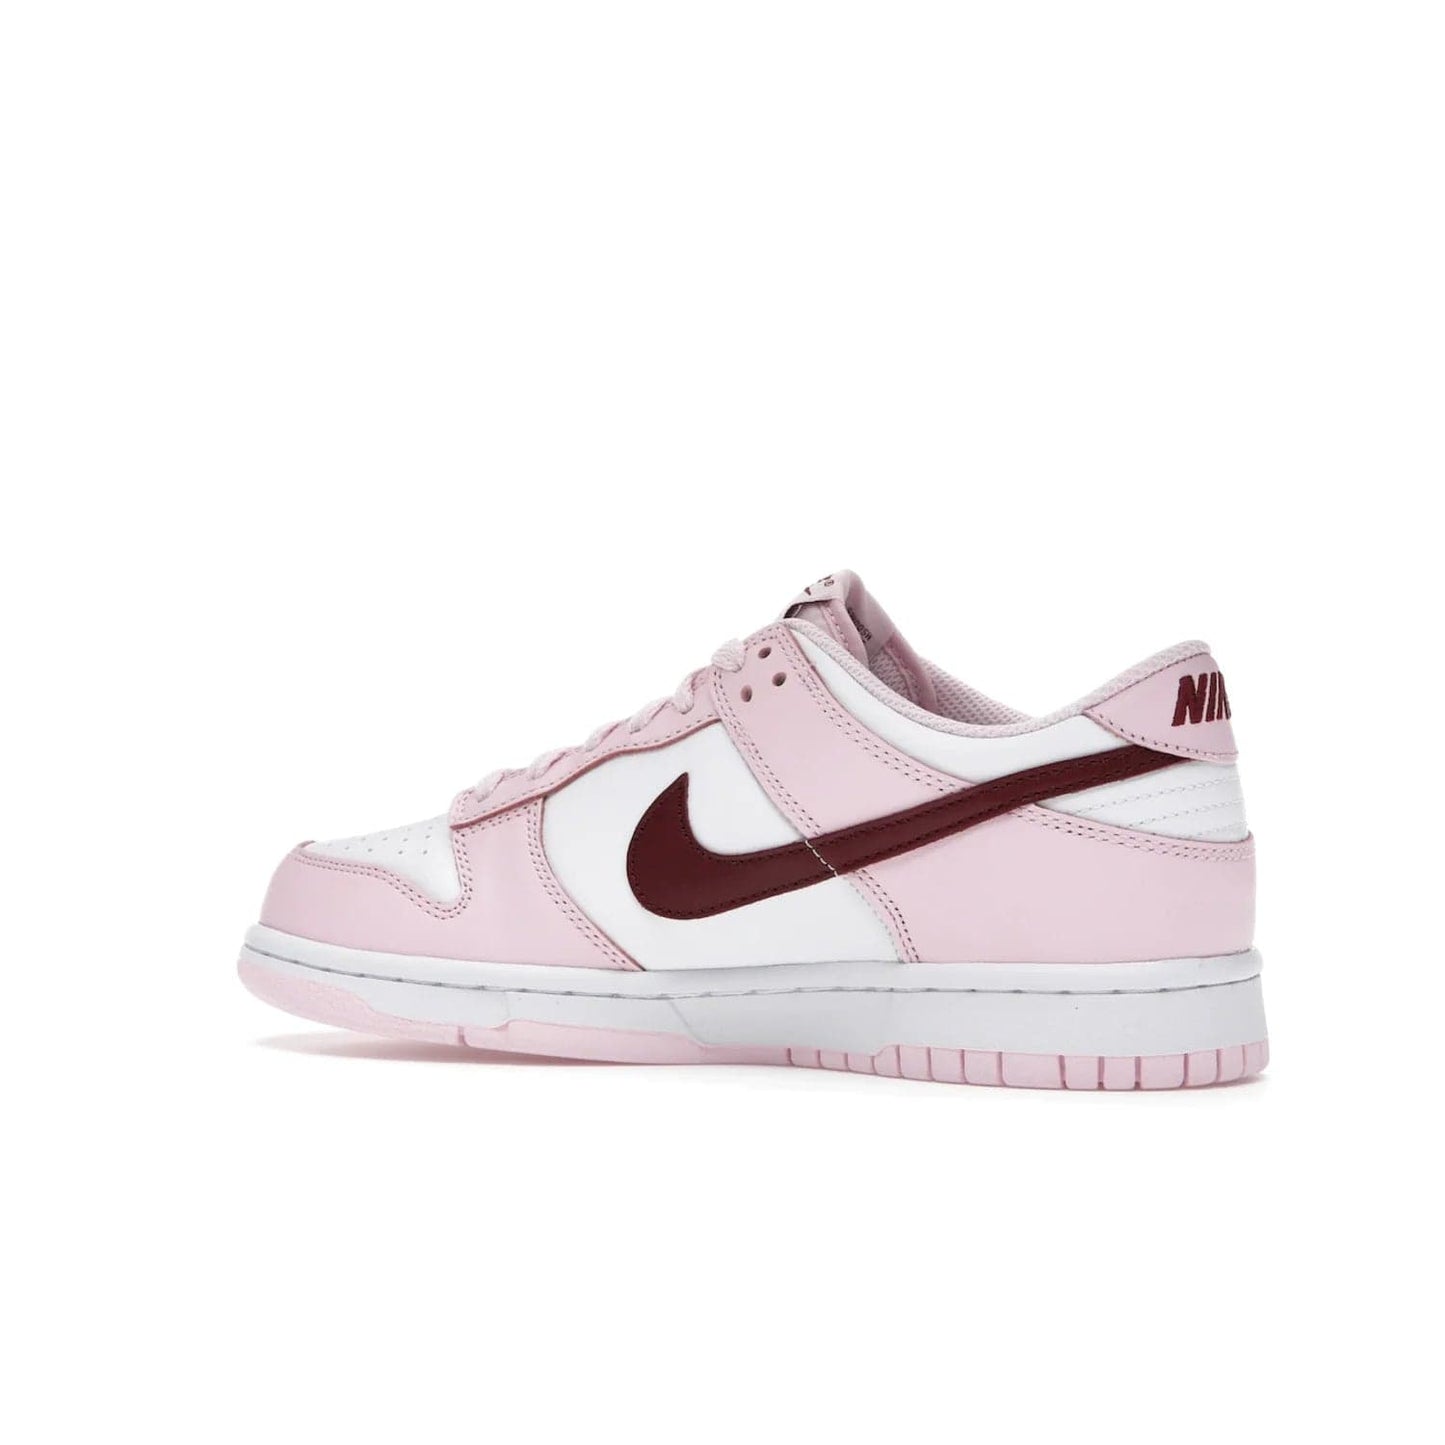 Nike Dunk Low Pink Foam Red White (GS) - Image 22 - Only at www.BallersClubKickz.com - #
Introducing the daring and stylish Nike Dunk Low Pink Foam Red White (GS) sneaker for grade schoolers. White leather with pink overlays and Dark Beetroot accents, classic Nike Dunk midsole and pink outsole. Released August 2021 for $85.